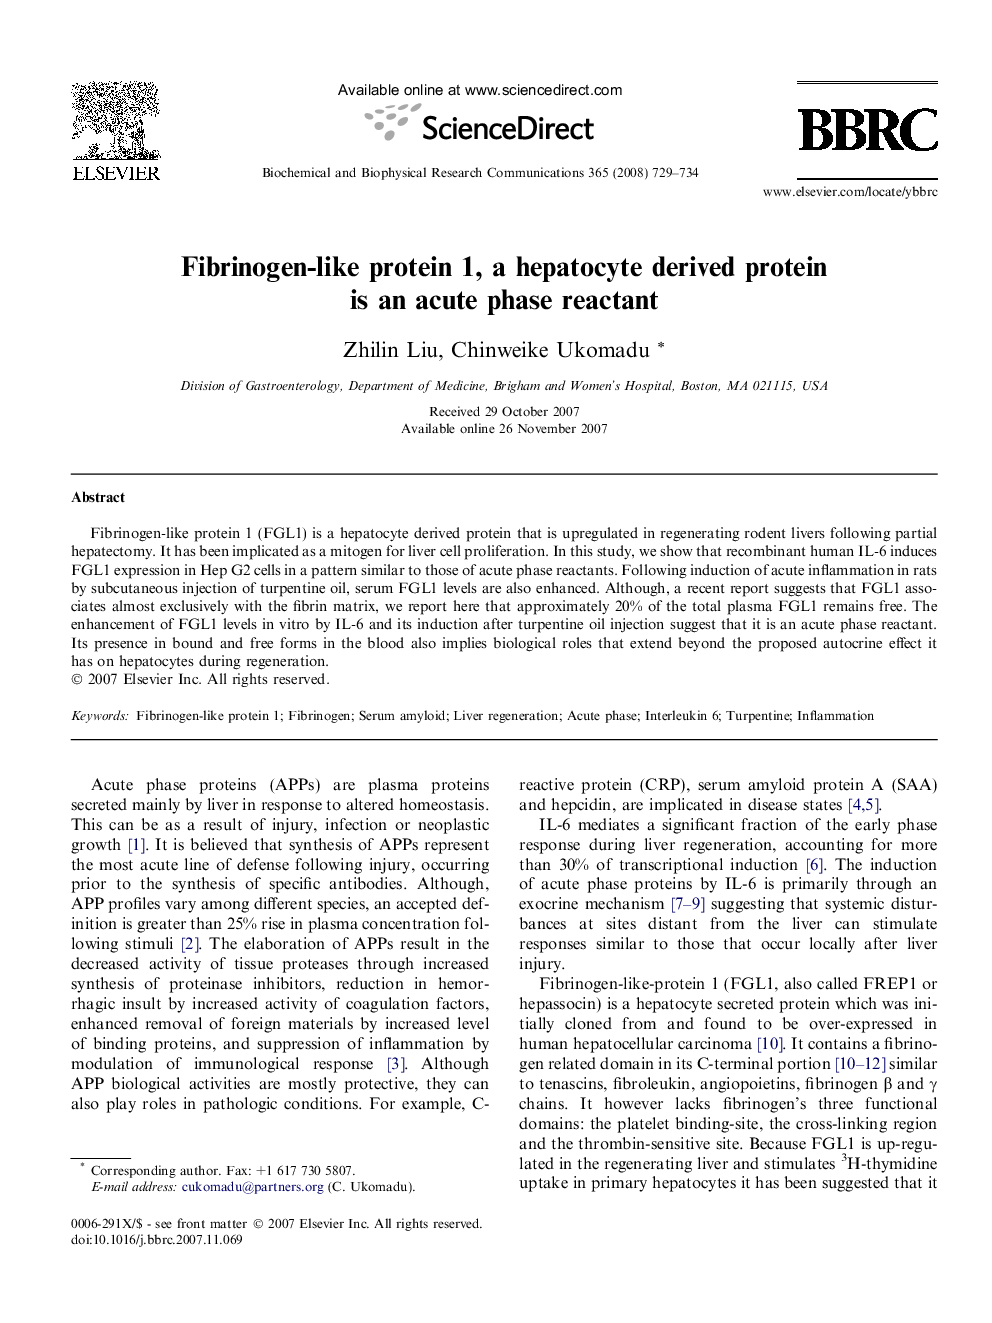 Fibrinogen-like protein 1, a hepatocyte derived protein is an acute phase reactant